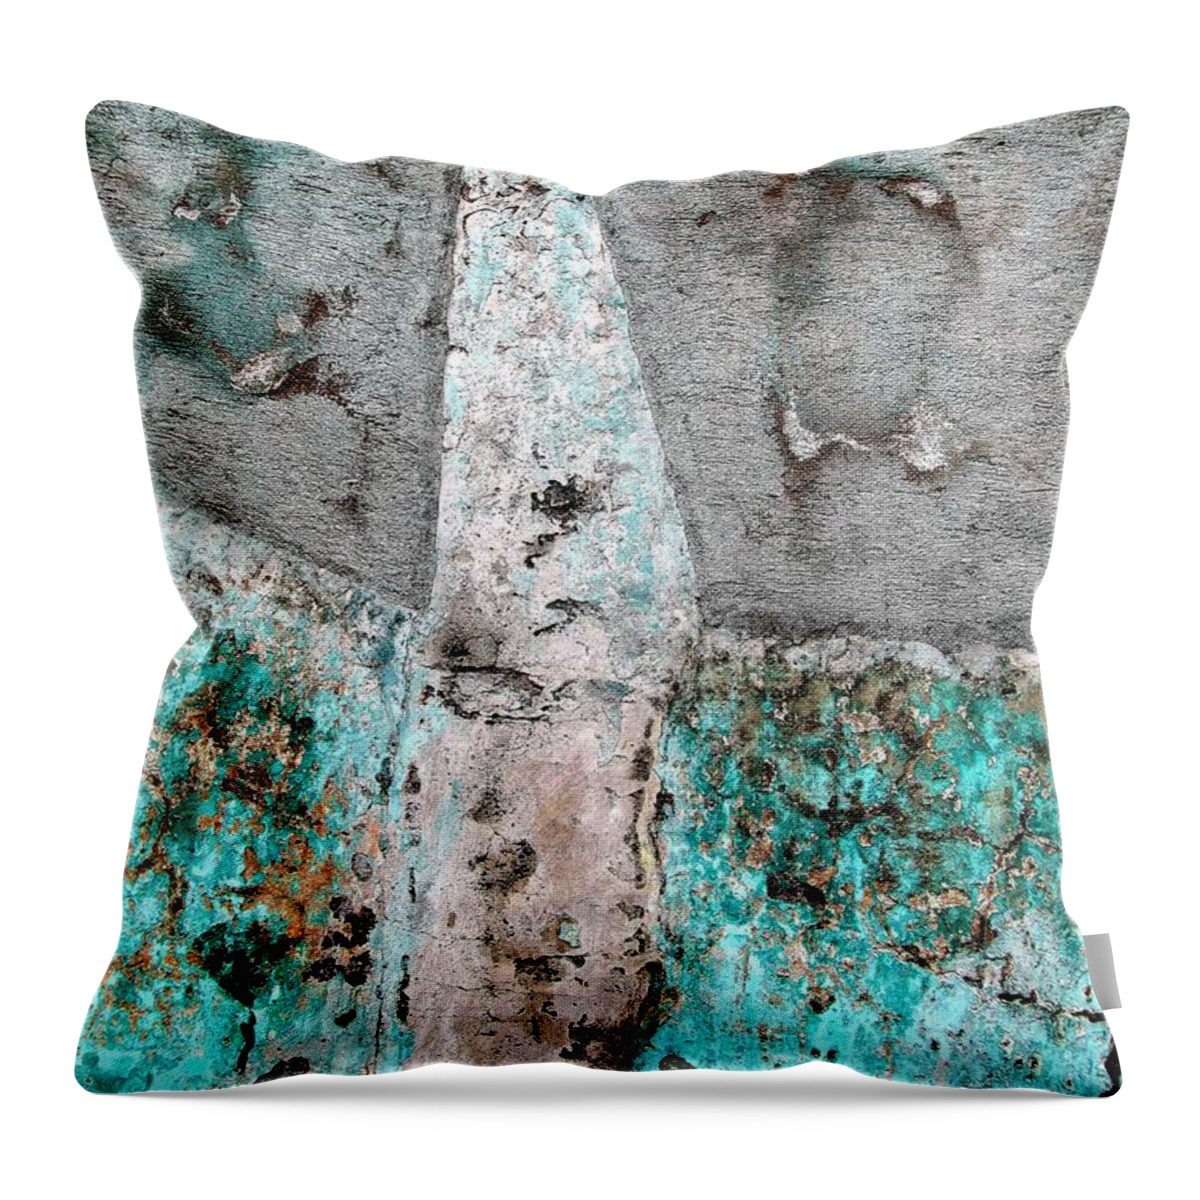 Texture Throw Pillow featuring the photograph Wall Abstract 118 by Maria Huntley